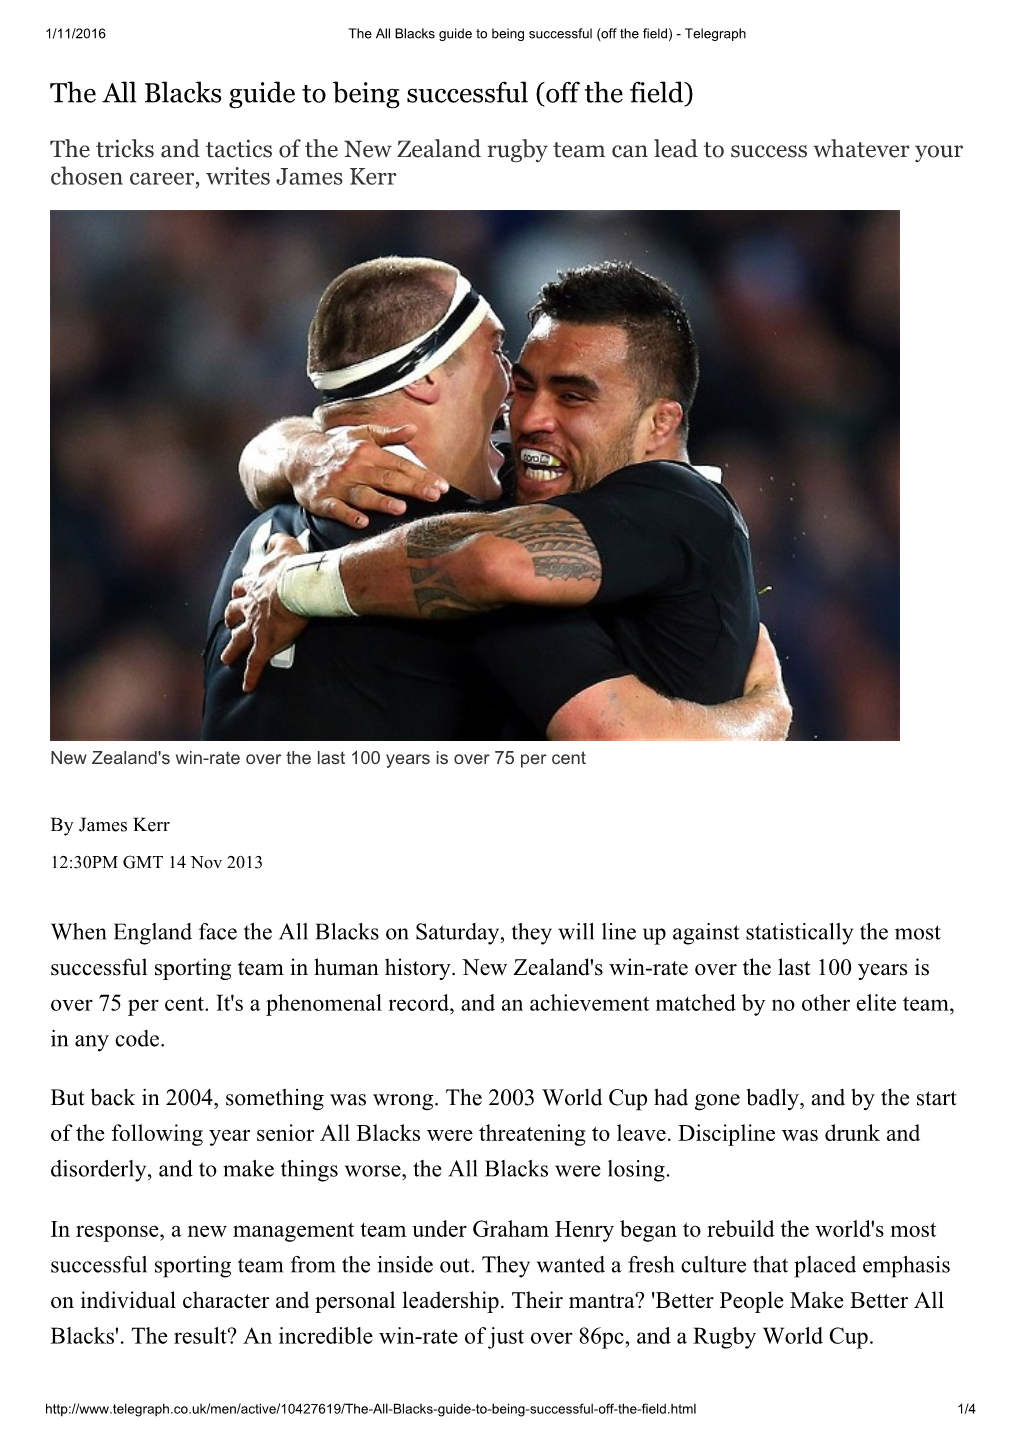 The All Blacks Guide to Being Successful (Off the Field) ­ Telegraph